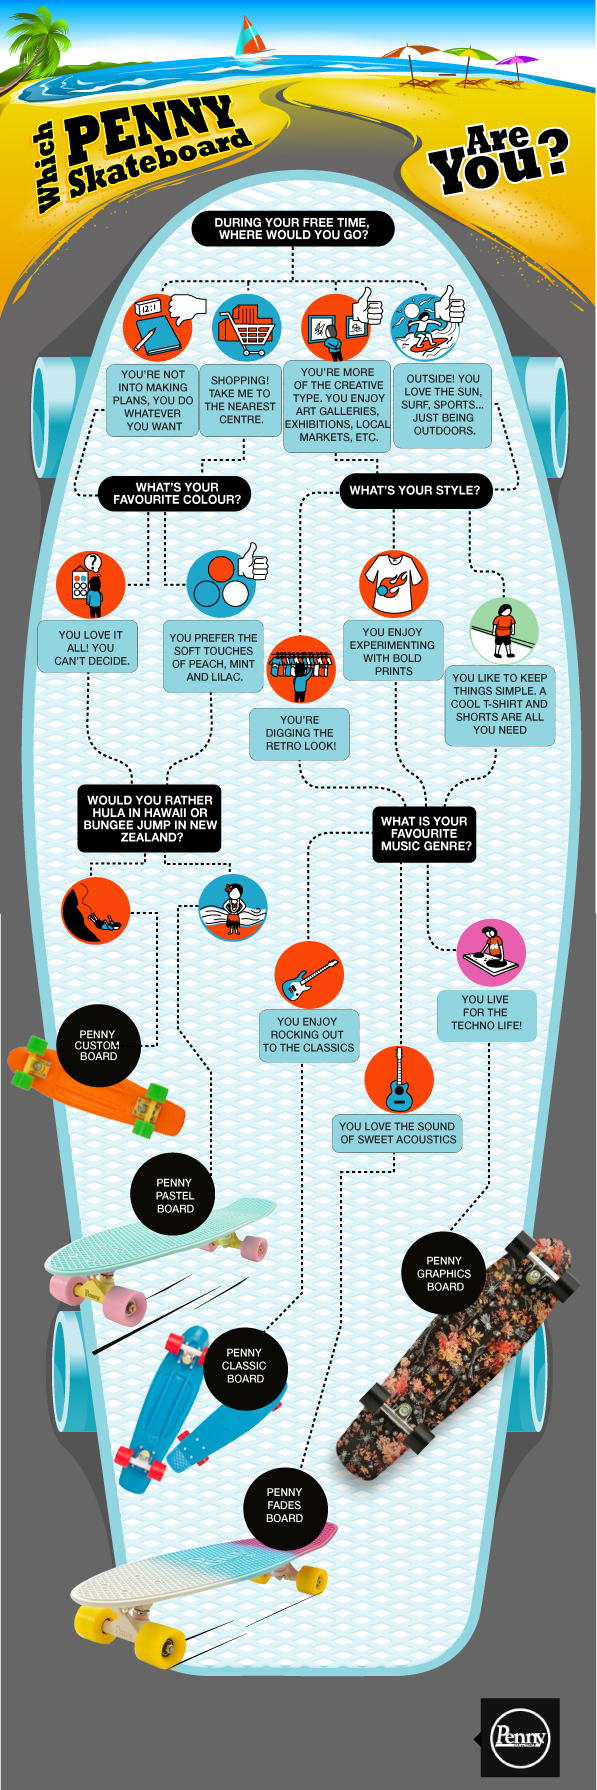 Penny Skateboard Infographic